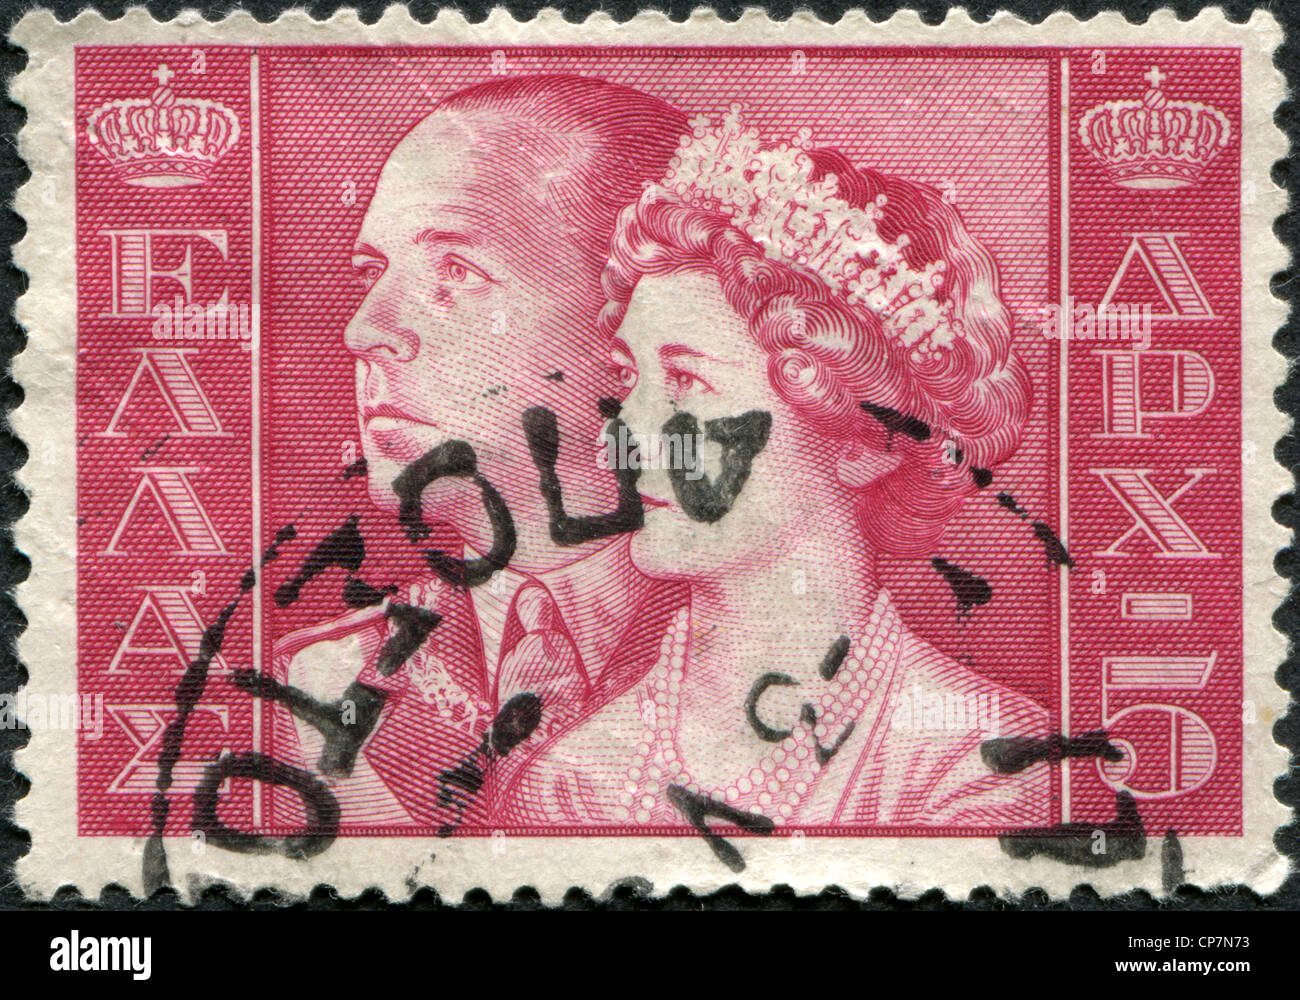 GREECE - CIRCA 1956: Postage stamps printed in Greece, shows King Paul I and Queen Frederica, circa 1956 Stock Photo